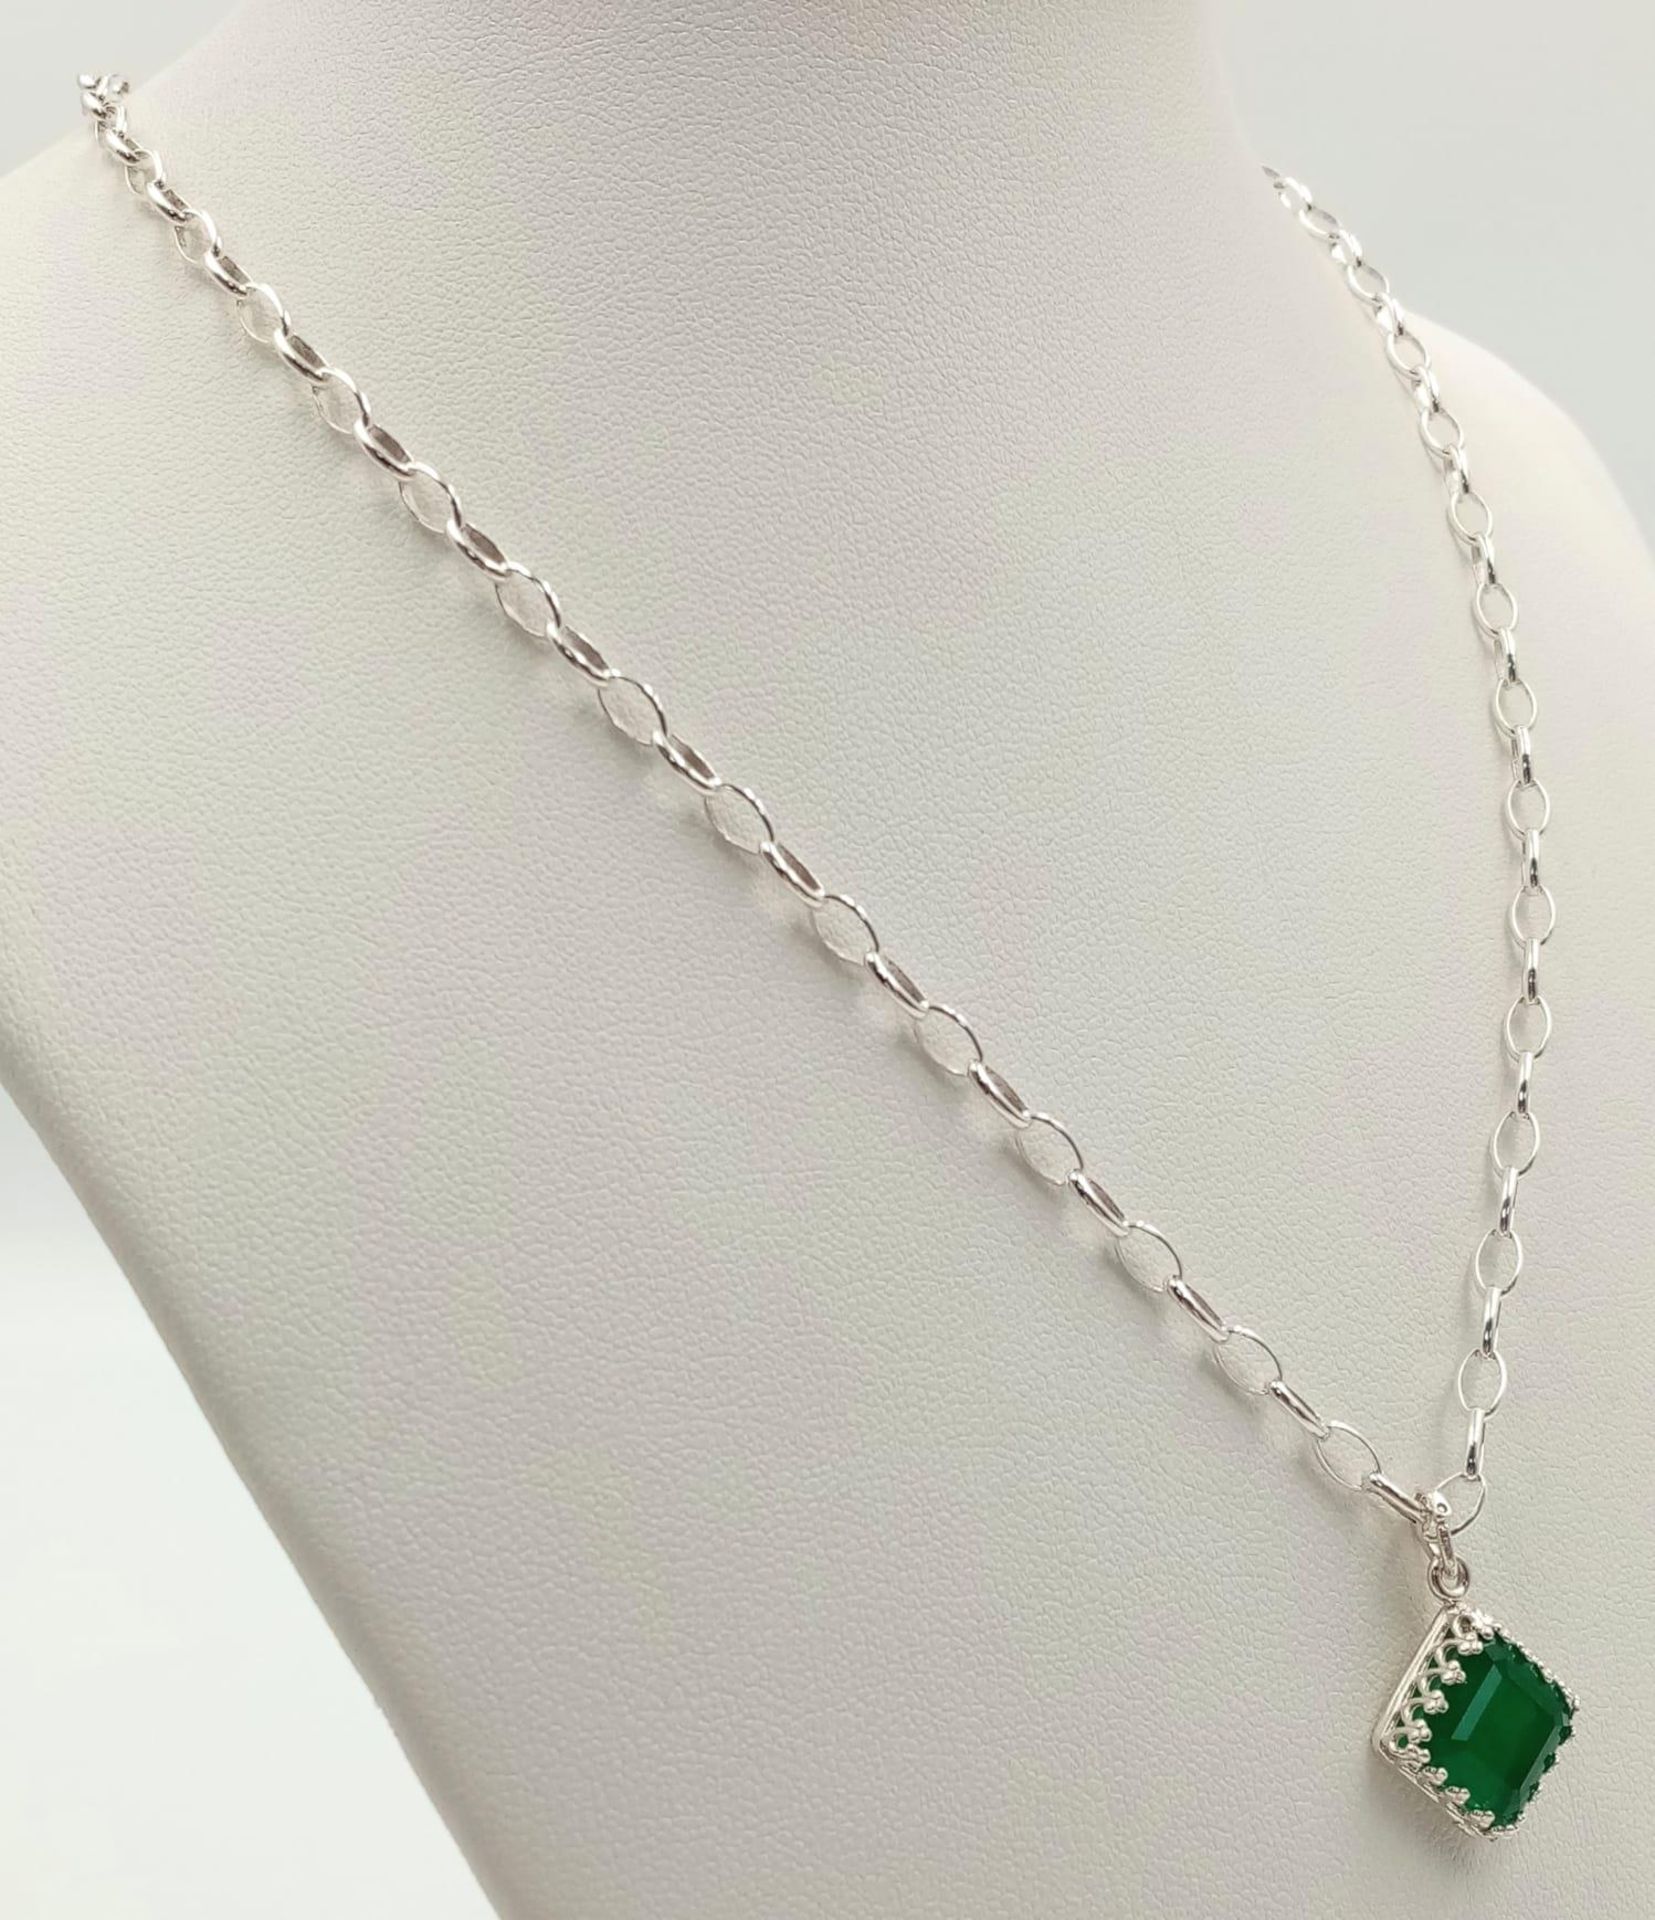 A sterling silver chain necklace with a green stone pendant, chain length: 42 cm, total weight: 6. - Bild 3 aus 6